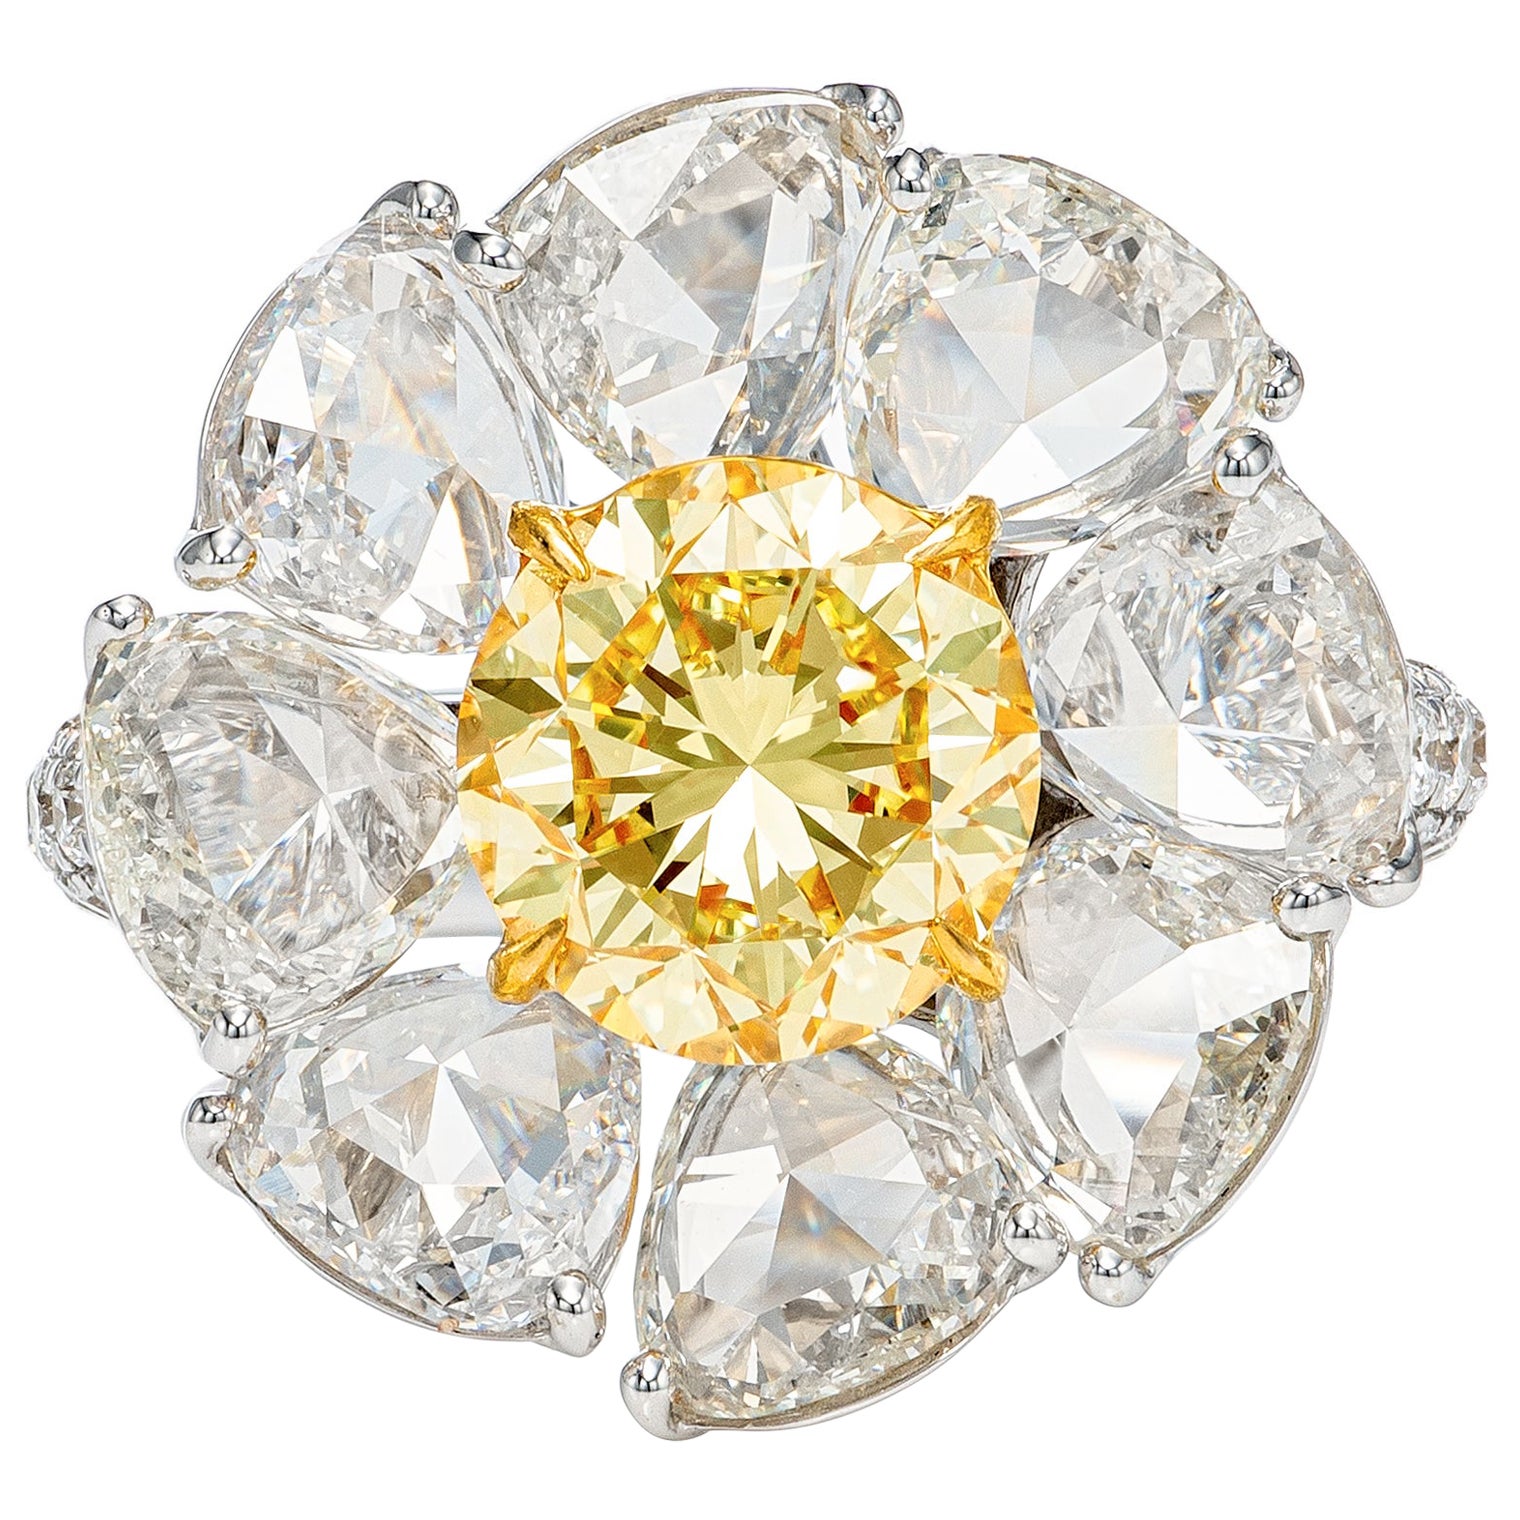 GIA Certified 7.39 Carat Daisy Fancy Yellow and White Diamond Ring in 18k Gold